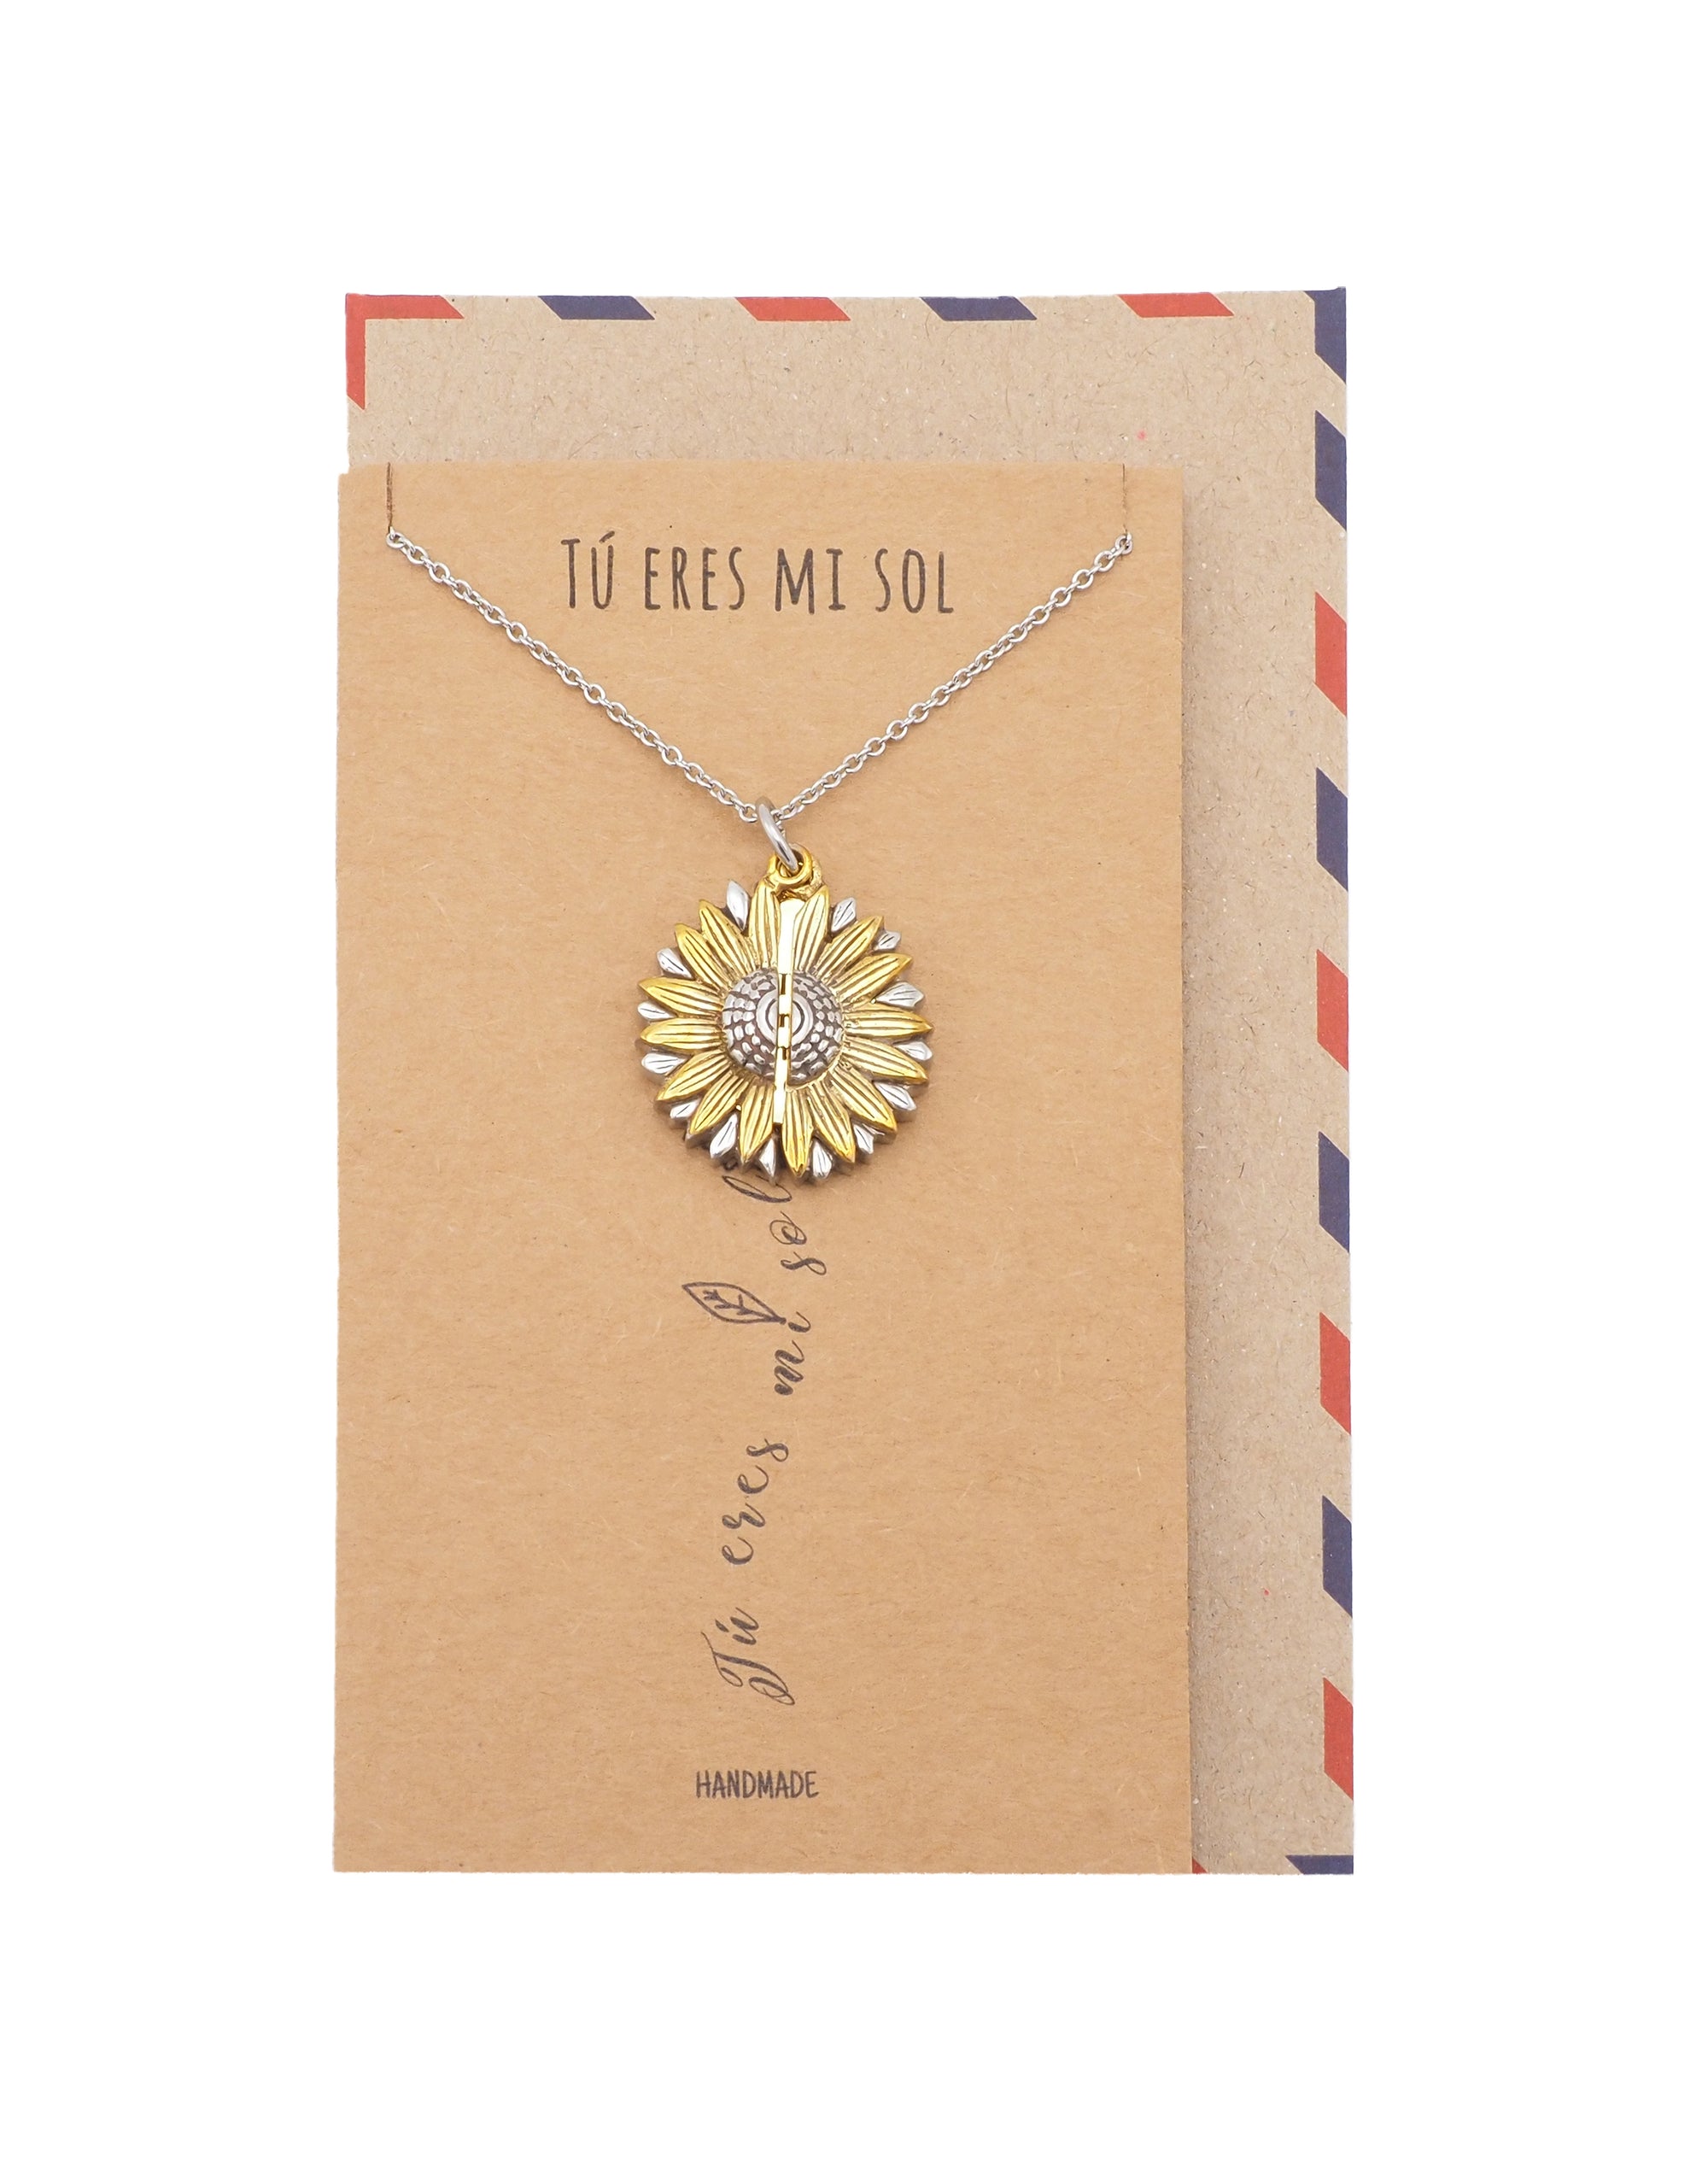 Adalee Tú Eres Mi Sol Necklace, Sunflower Locket Pendant, Spanish Engraved Gifts Jewelry Greeting Cards